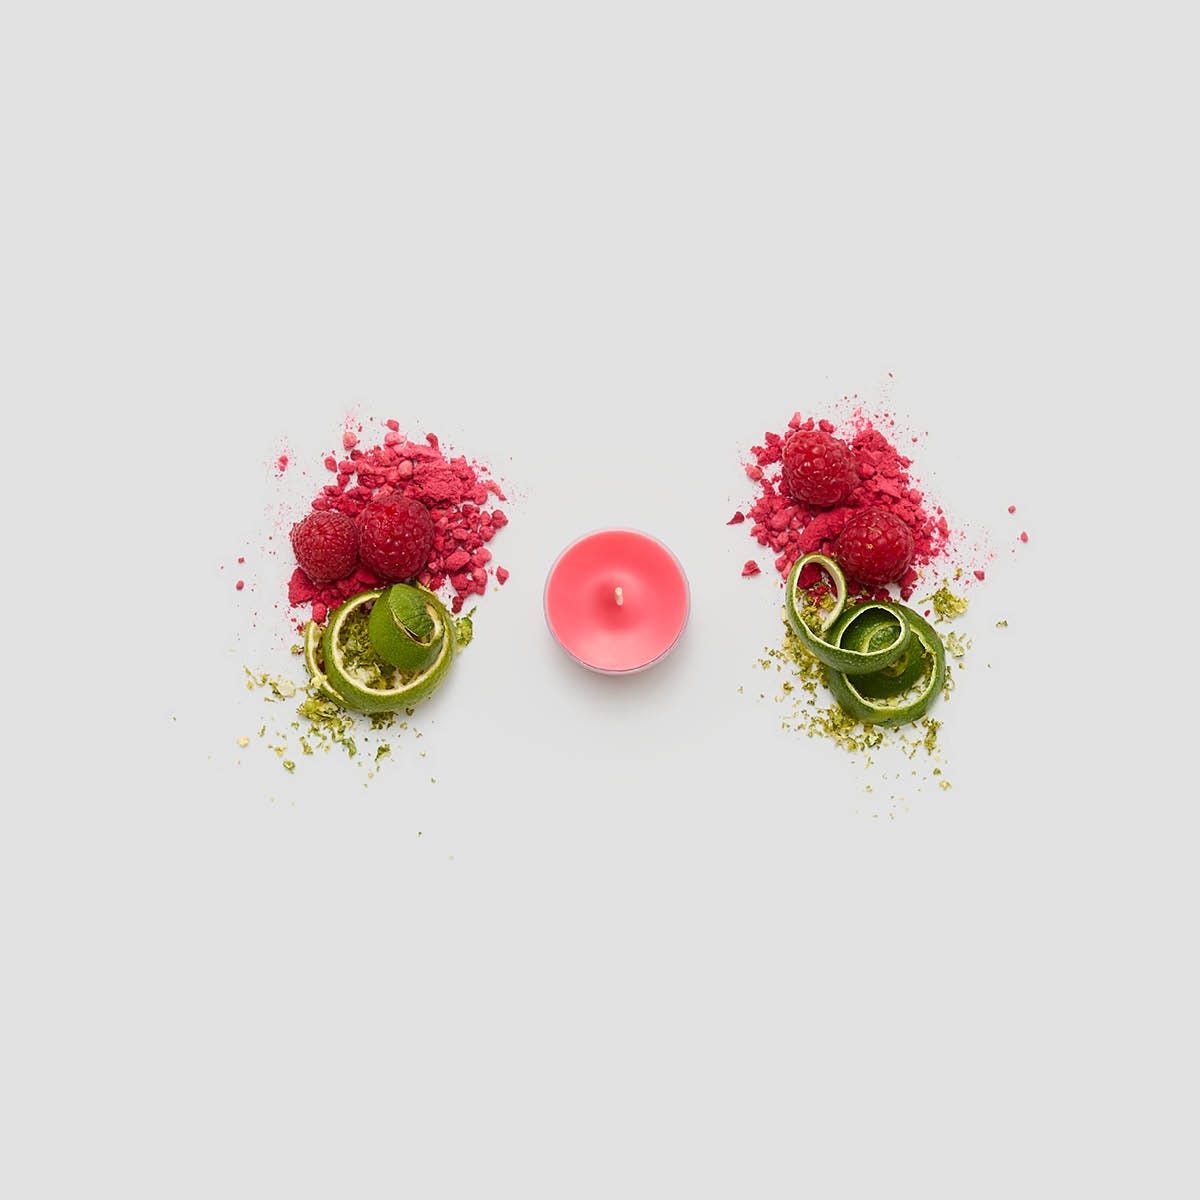 Raspberry Lime Breeze Universal Tealight® Candles - PartyLite US